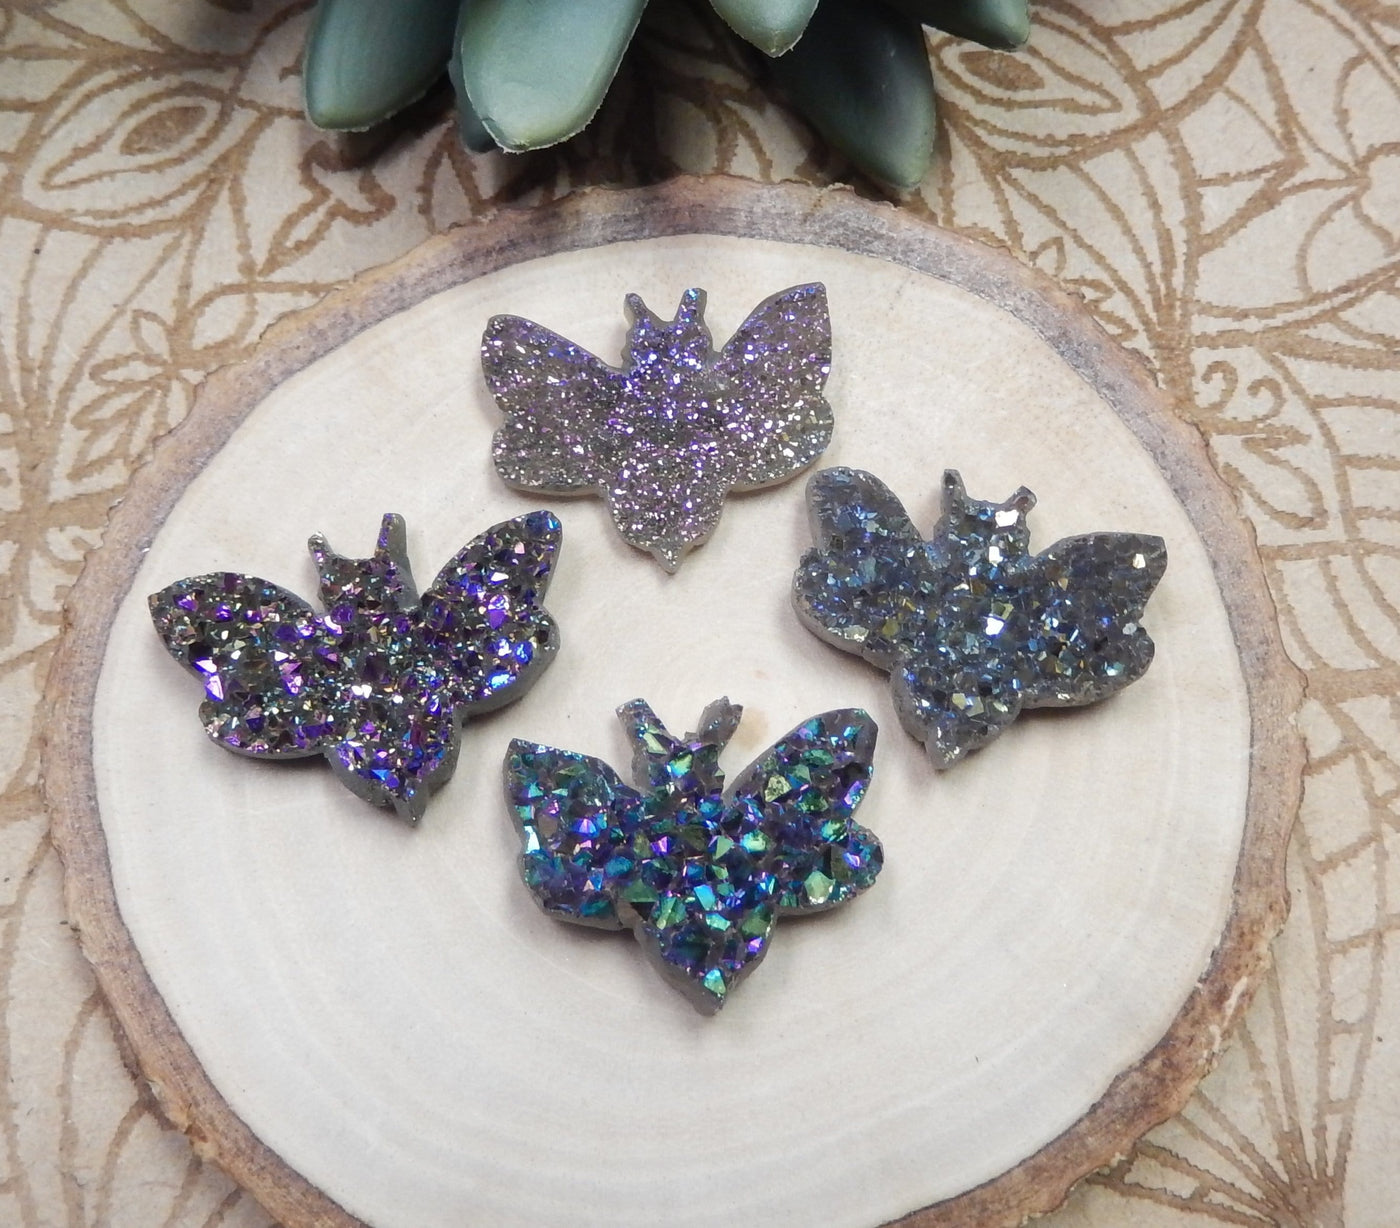 4 Titanium Cabochon Druzy Bumblebee Undrilled Pendants pictured together for color and size reference